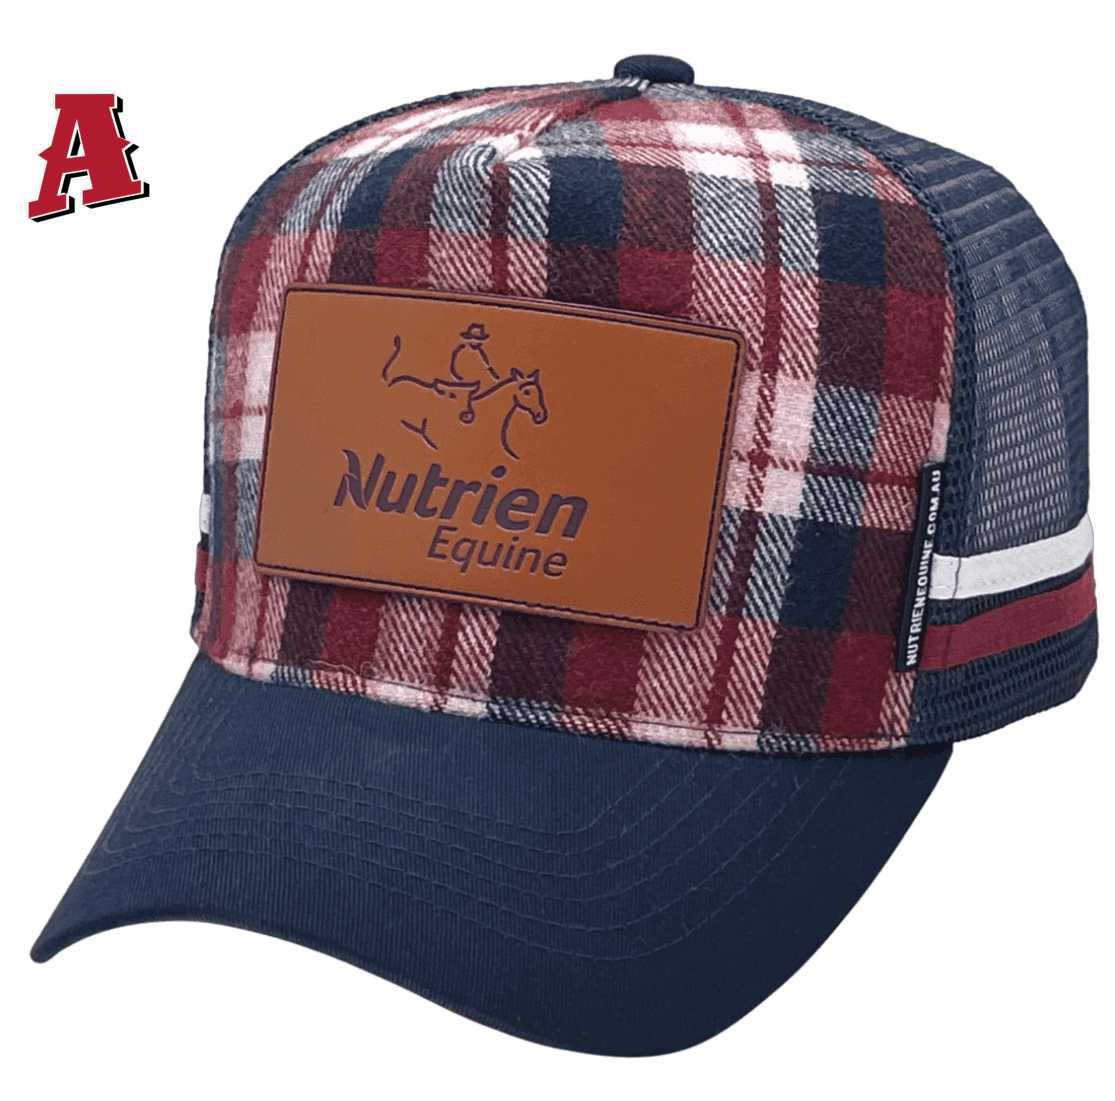 Nutrien Equine Mammoth Flannel Check Fabric Tamworth NSW HP Midrange Aussie Trucker Hats with 2 Side Bands